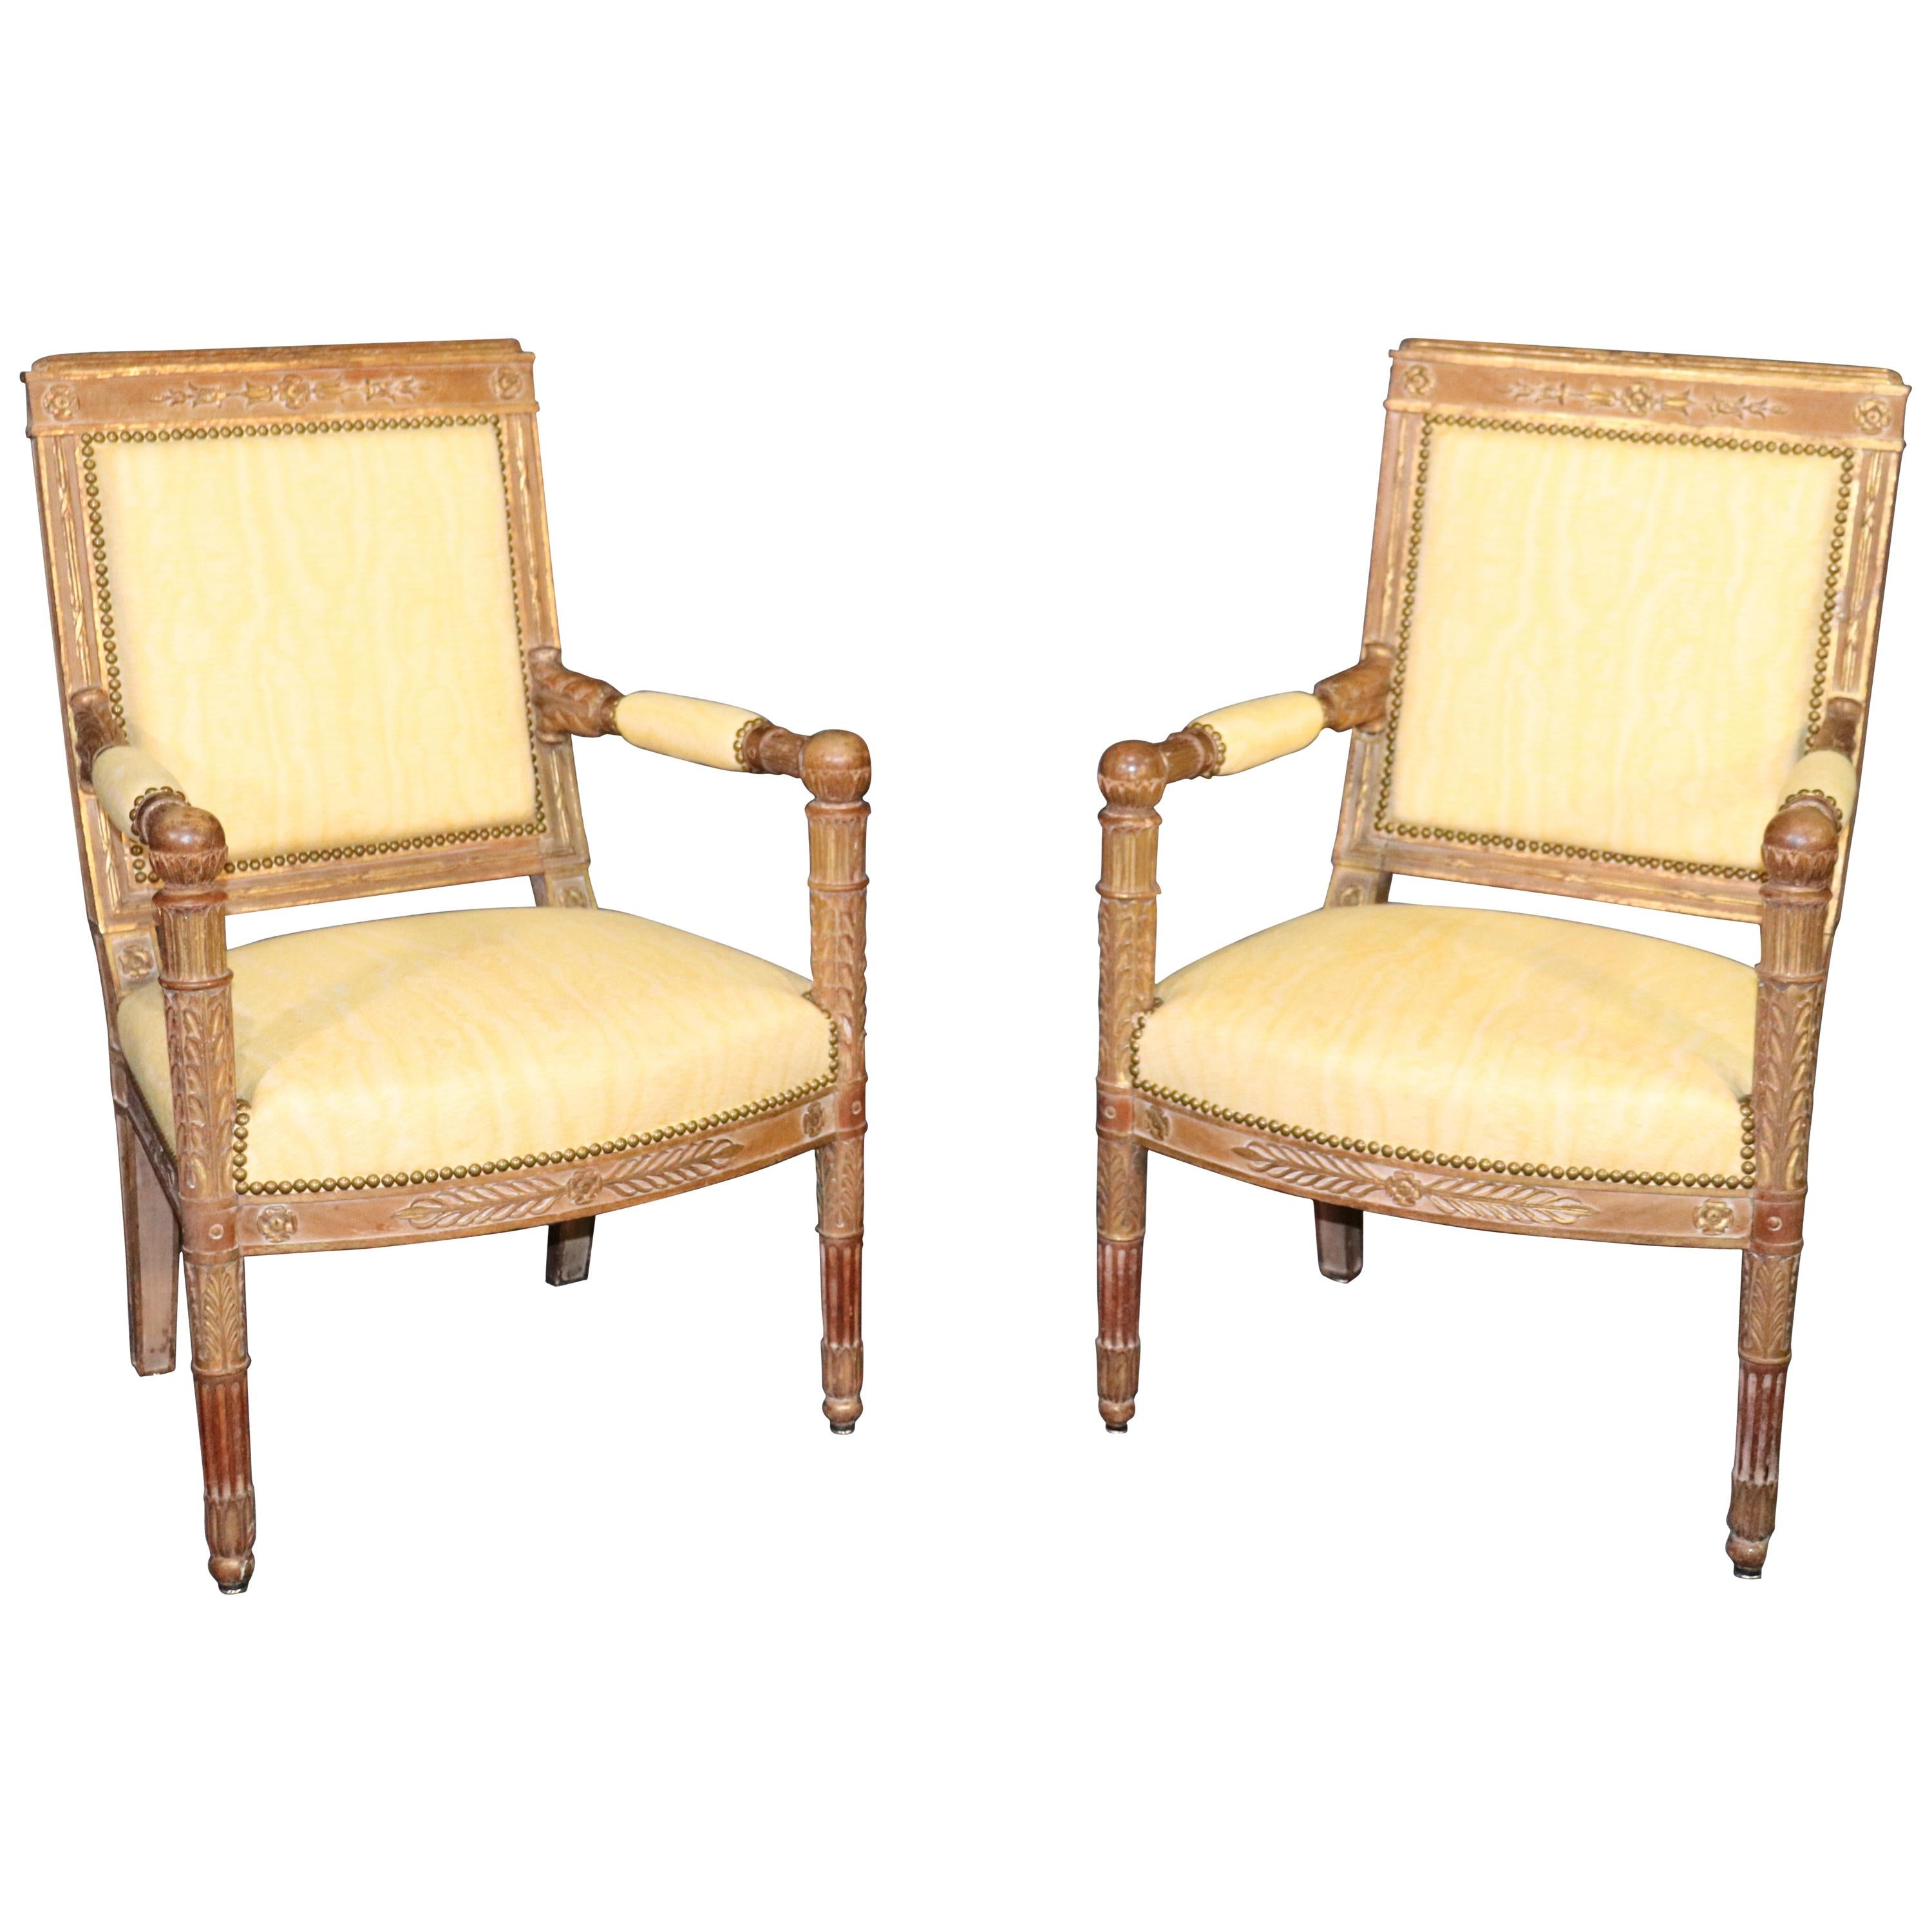 Pair of Carved Walnut French Empire Open Armchairs Fauteuils, circa 1870